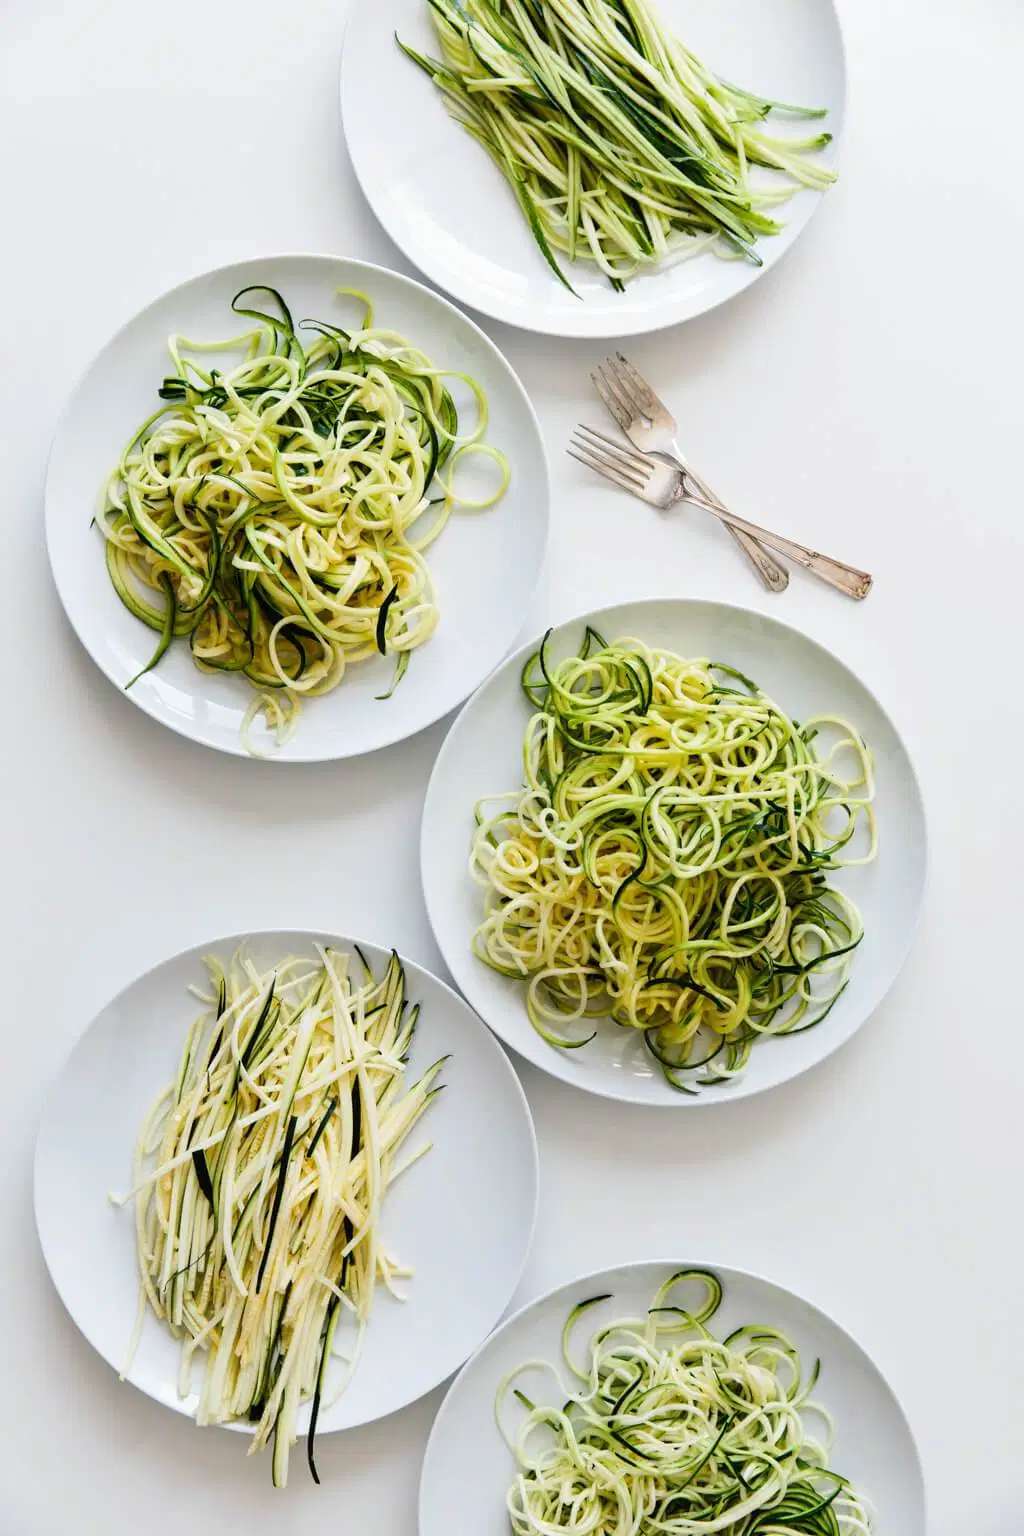 Zucchini noodles on plates